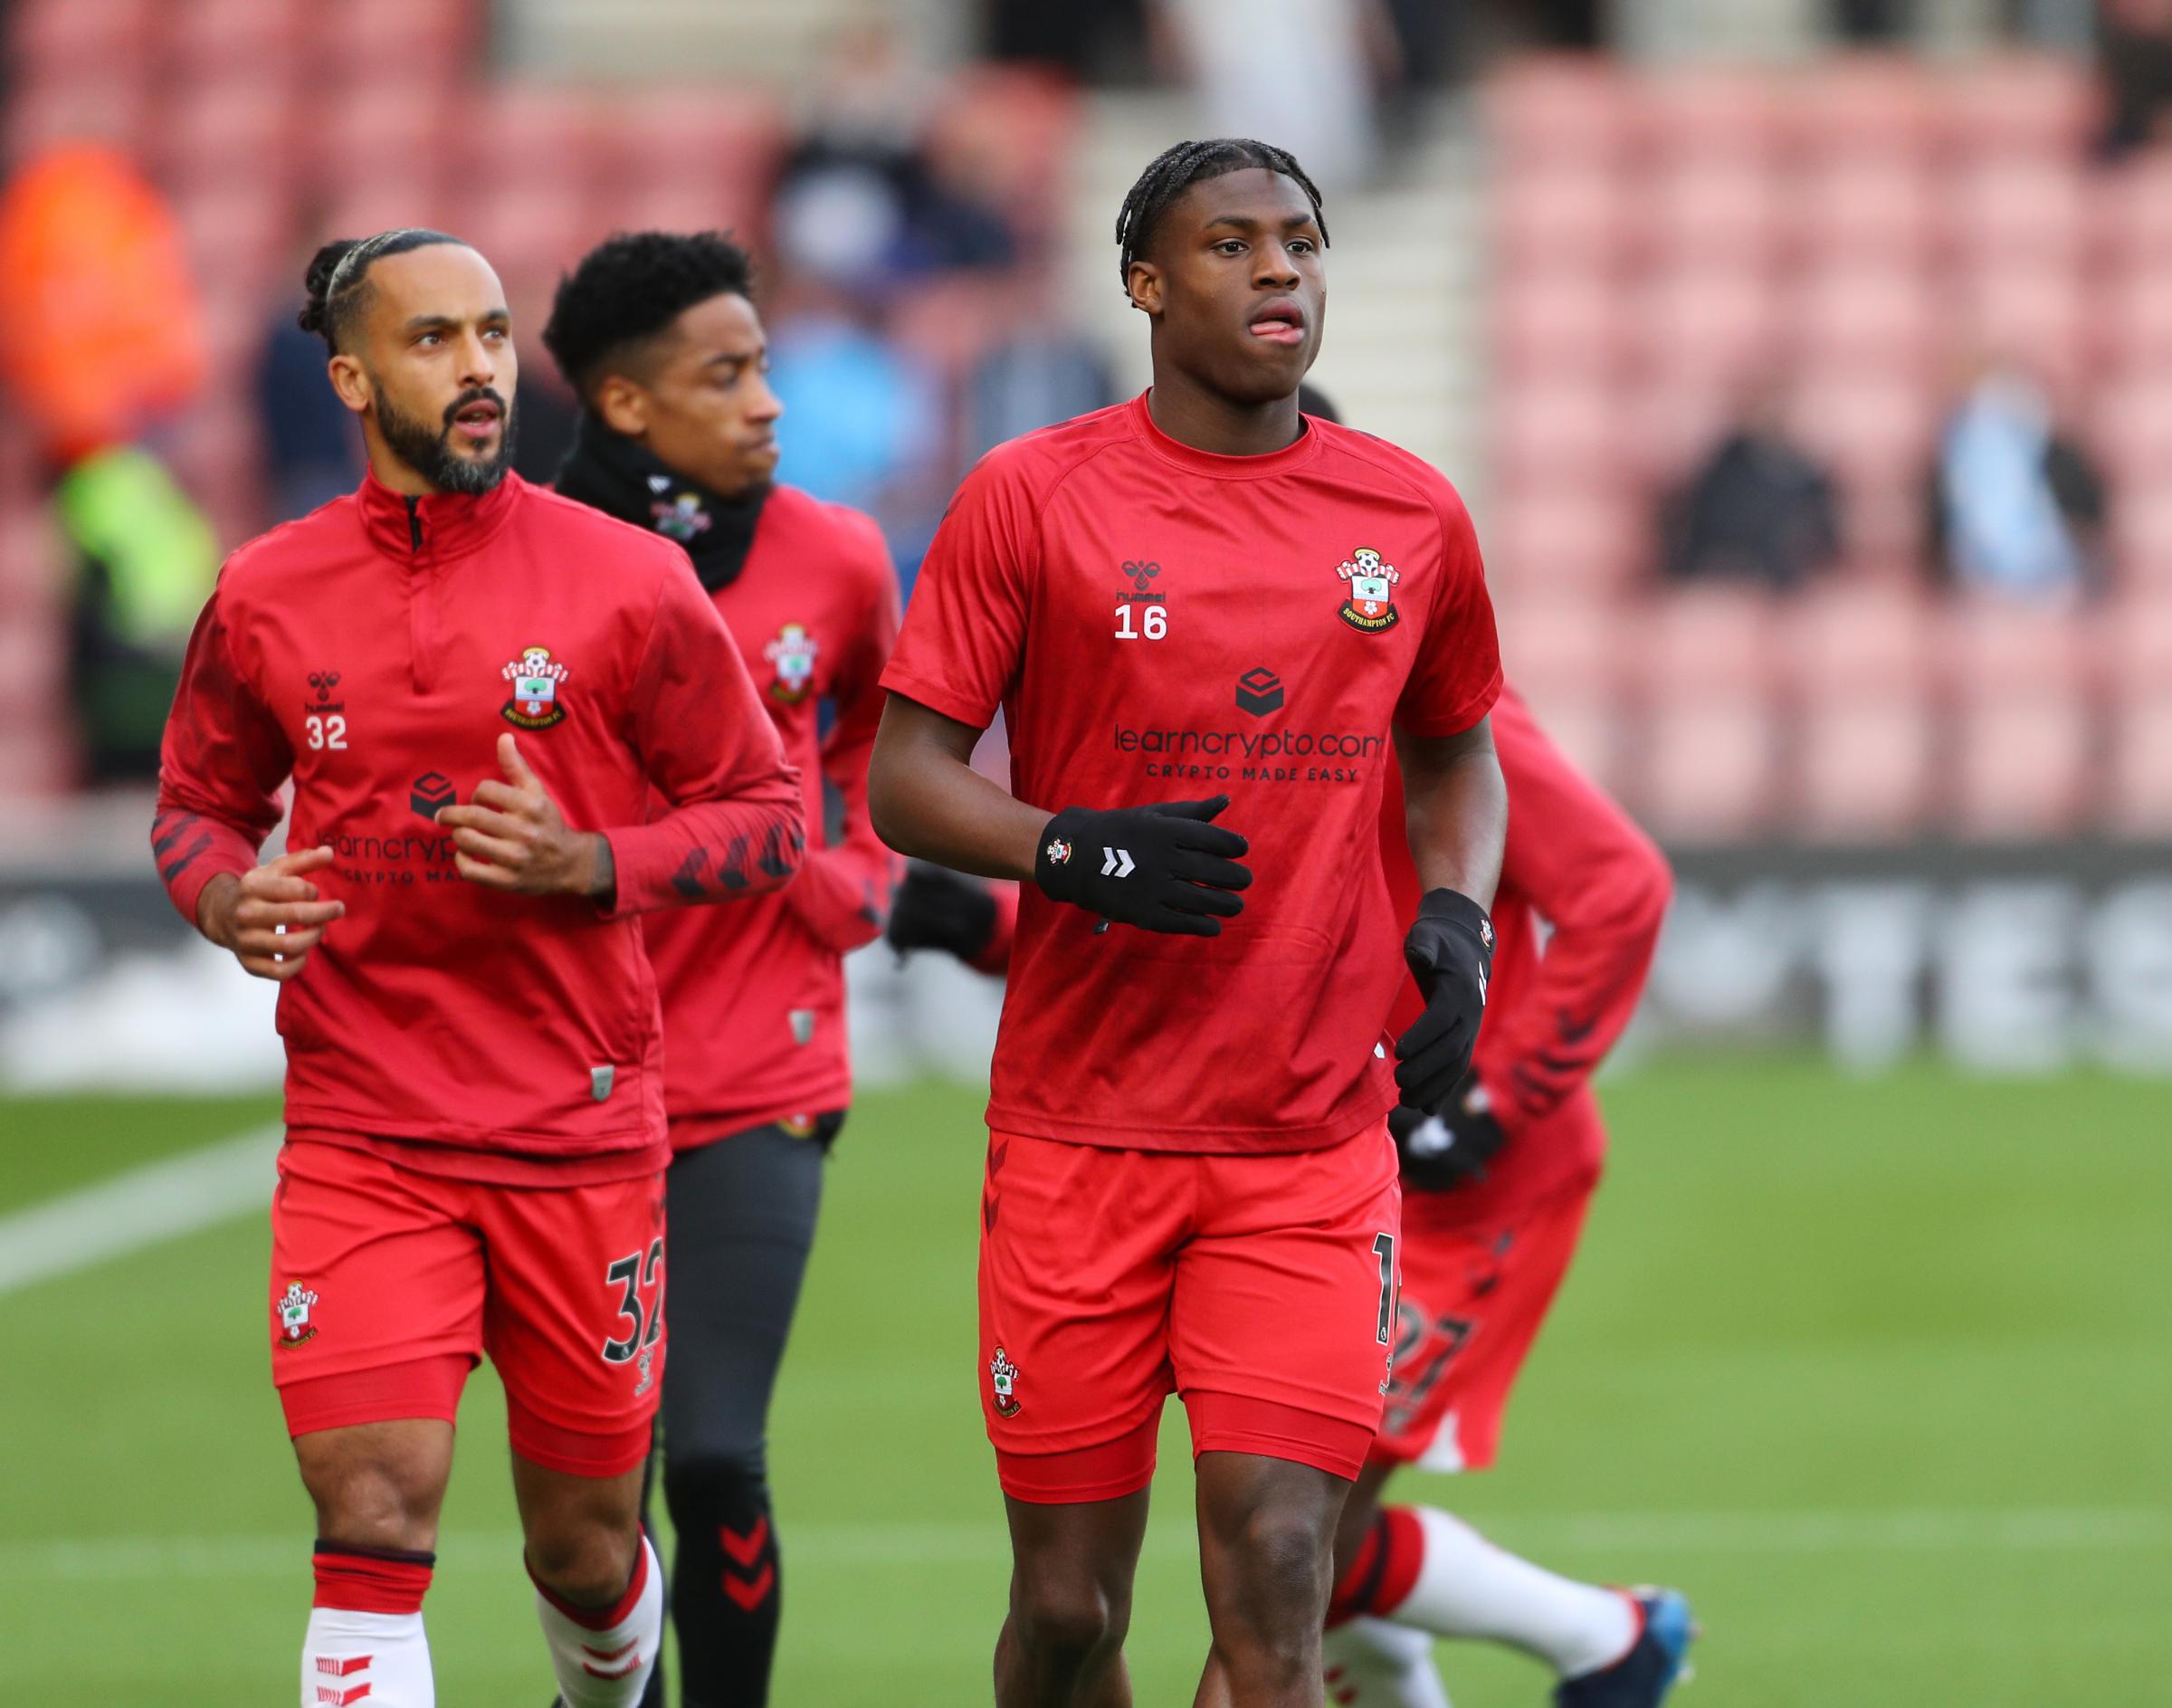 Southampton B have playoff dreams dashed with last-minute winner